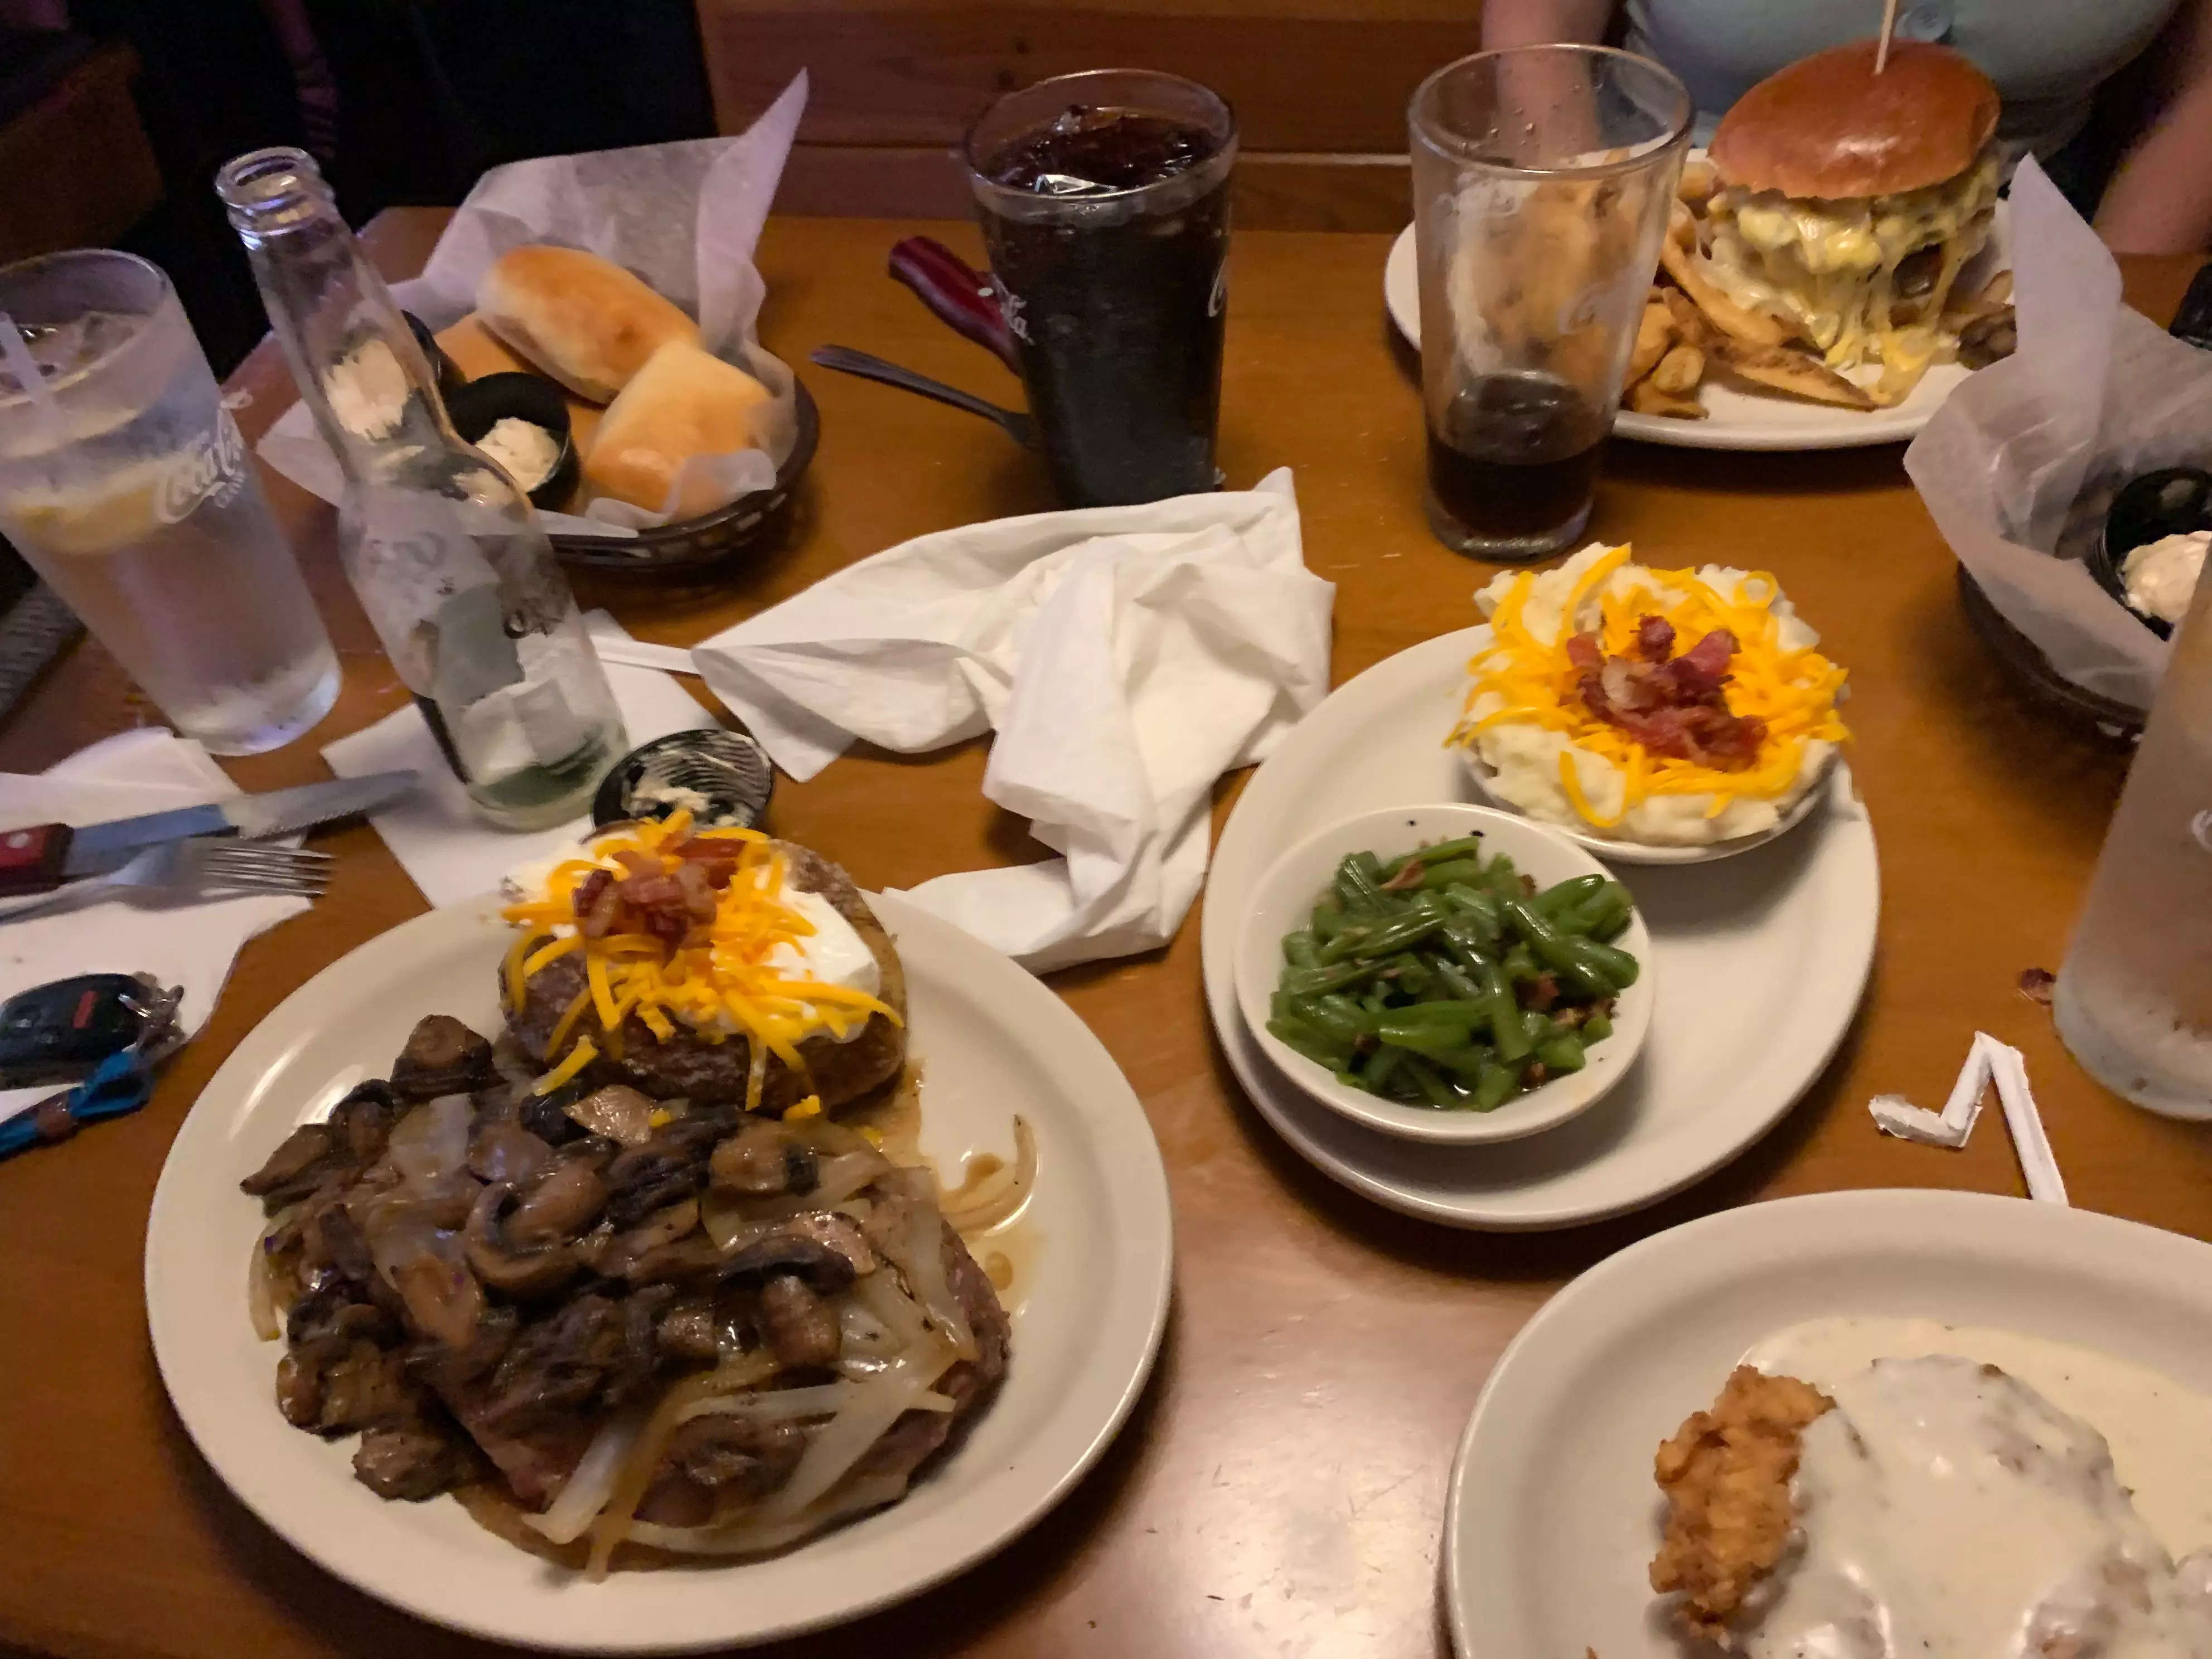 
I ate at chains like Texas Roadhouse, Cheesecake Factory, Olive Garden and saw how casual dining bounced back in 2021
